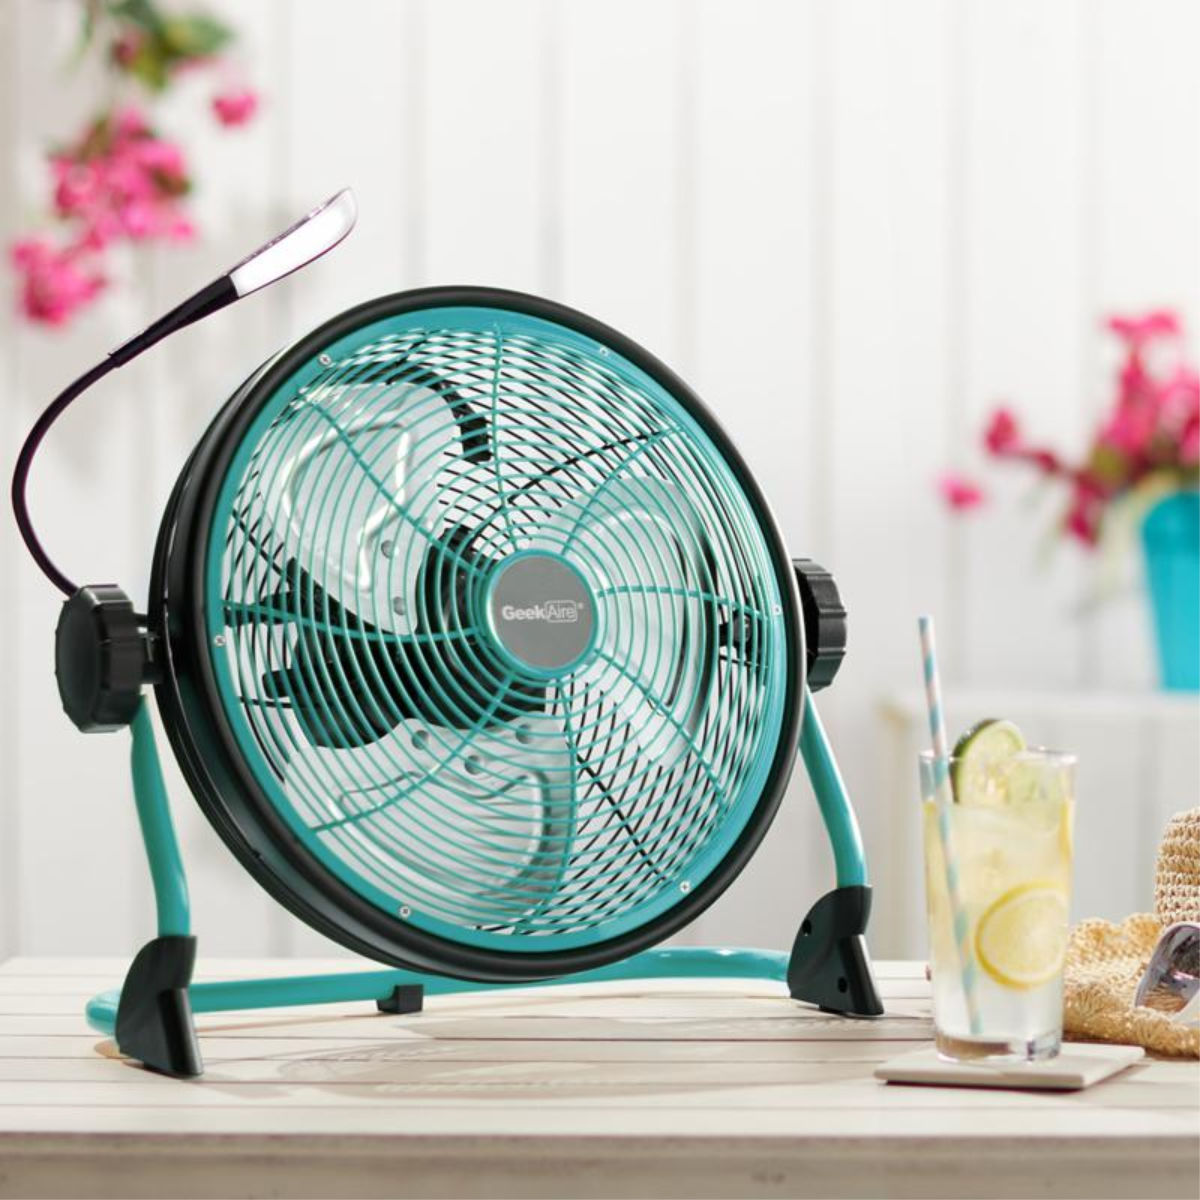 Geek Aire 12-Inch Rechargeable Water-Resistant Fan